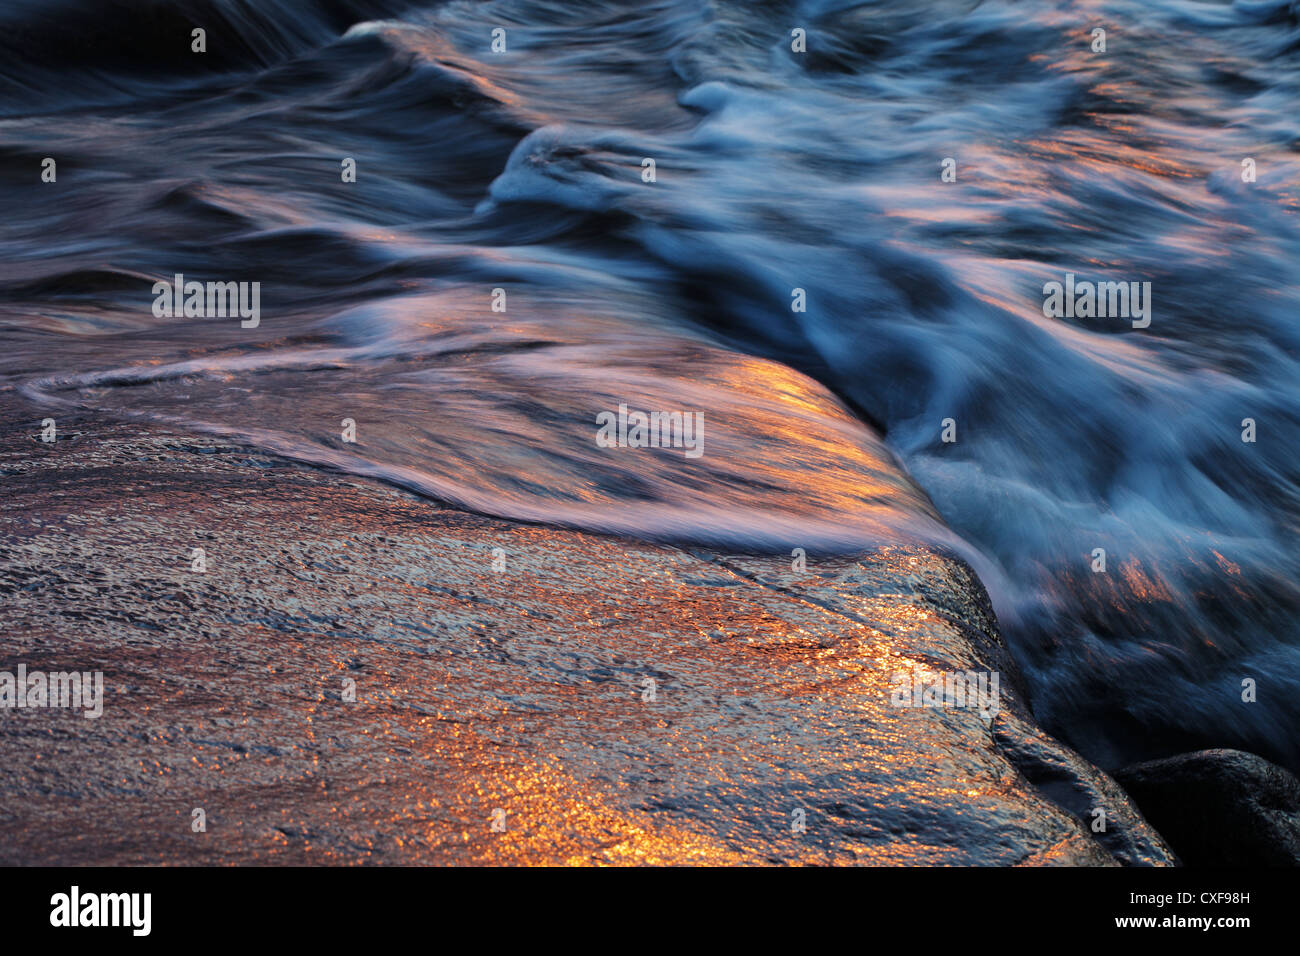 Sea waves on a rock in evening light. Stock Photo